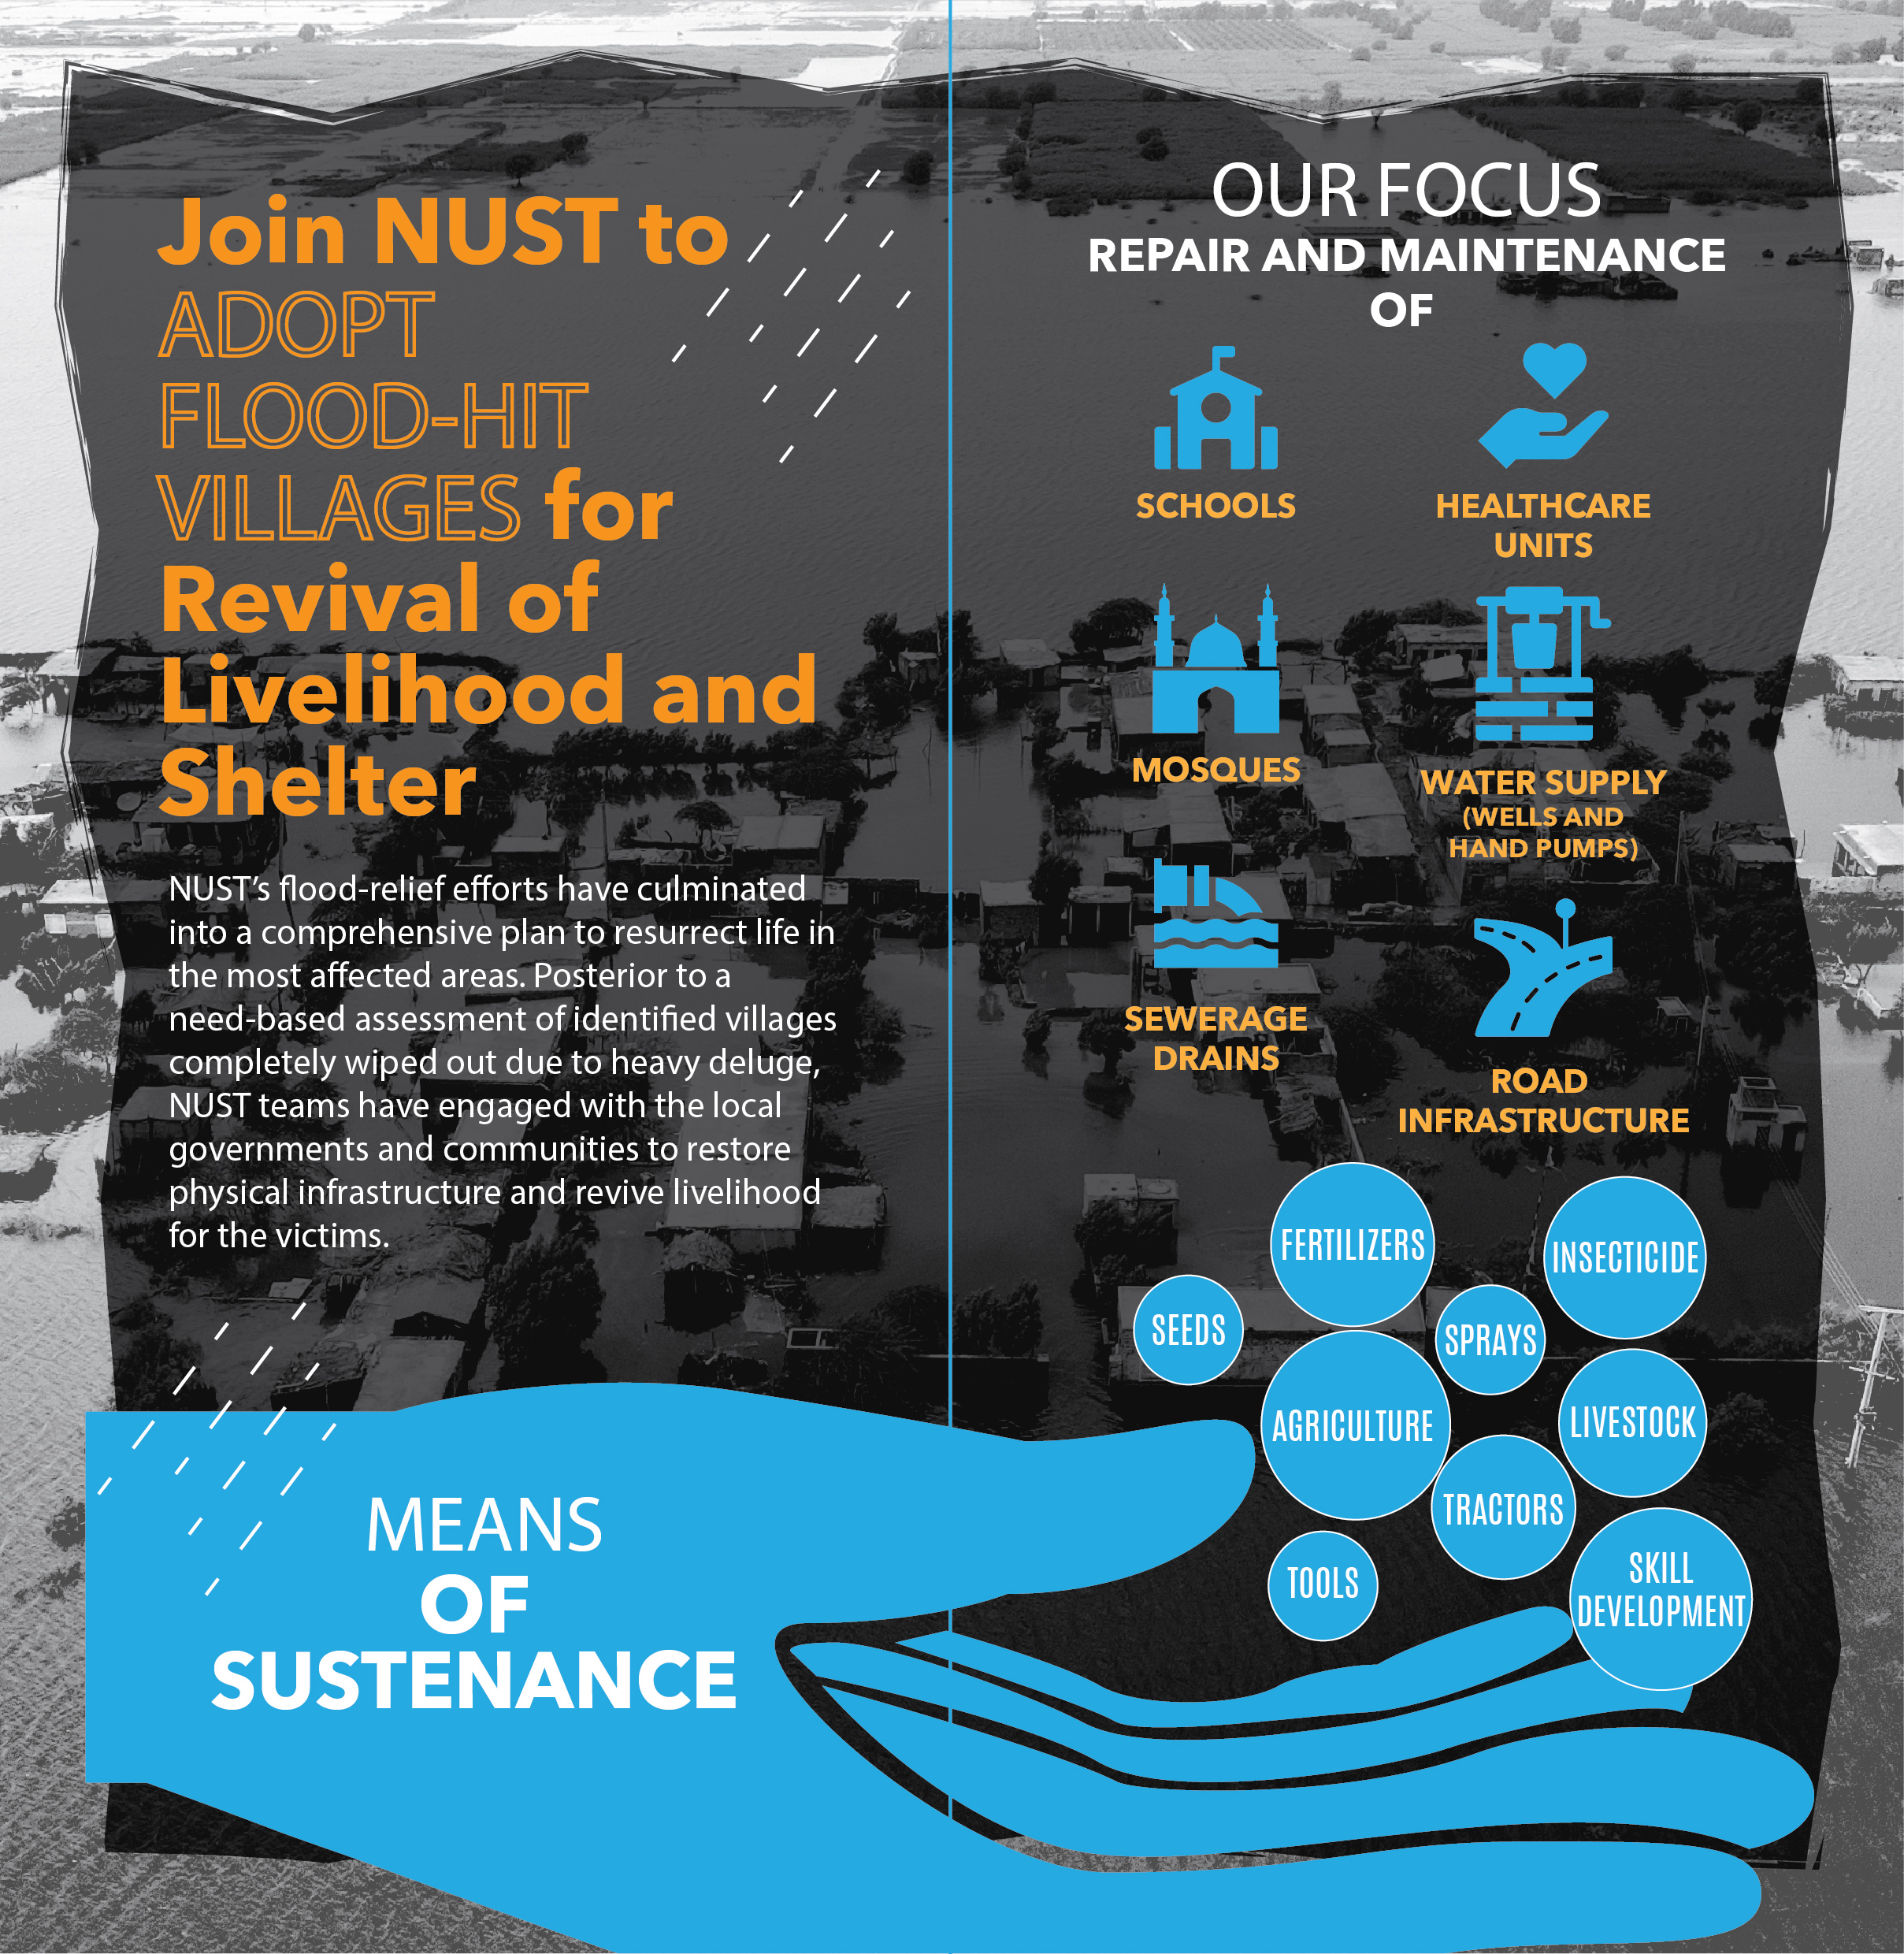 NUST Flood Relief Fund now accepting donations for Adopt a Village initiative for long-term rehabilitation of flood hit areas in Pakistan